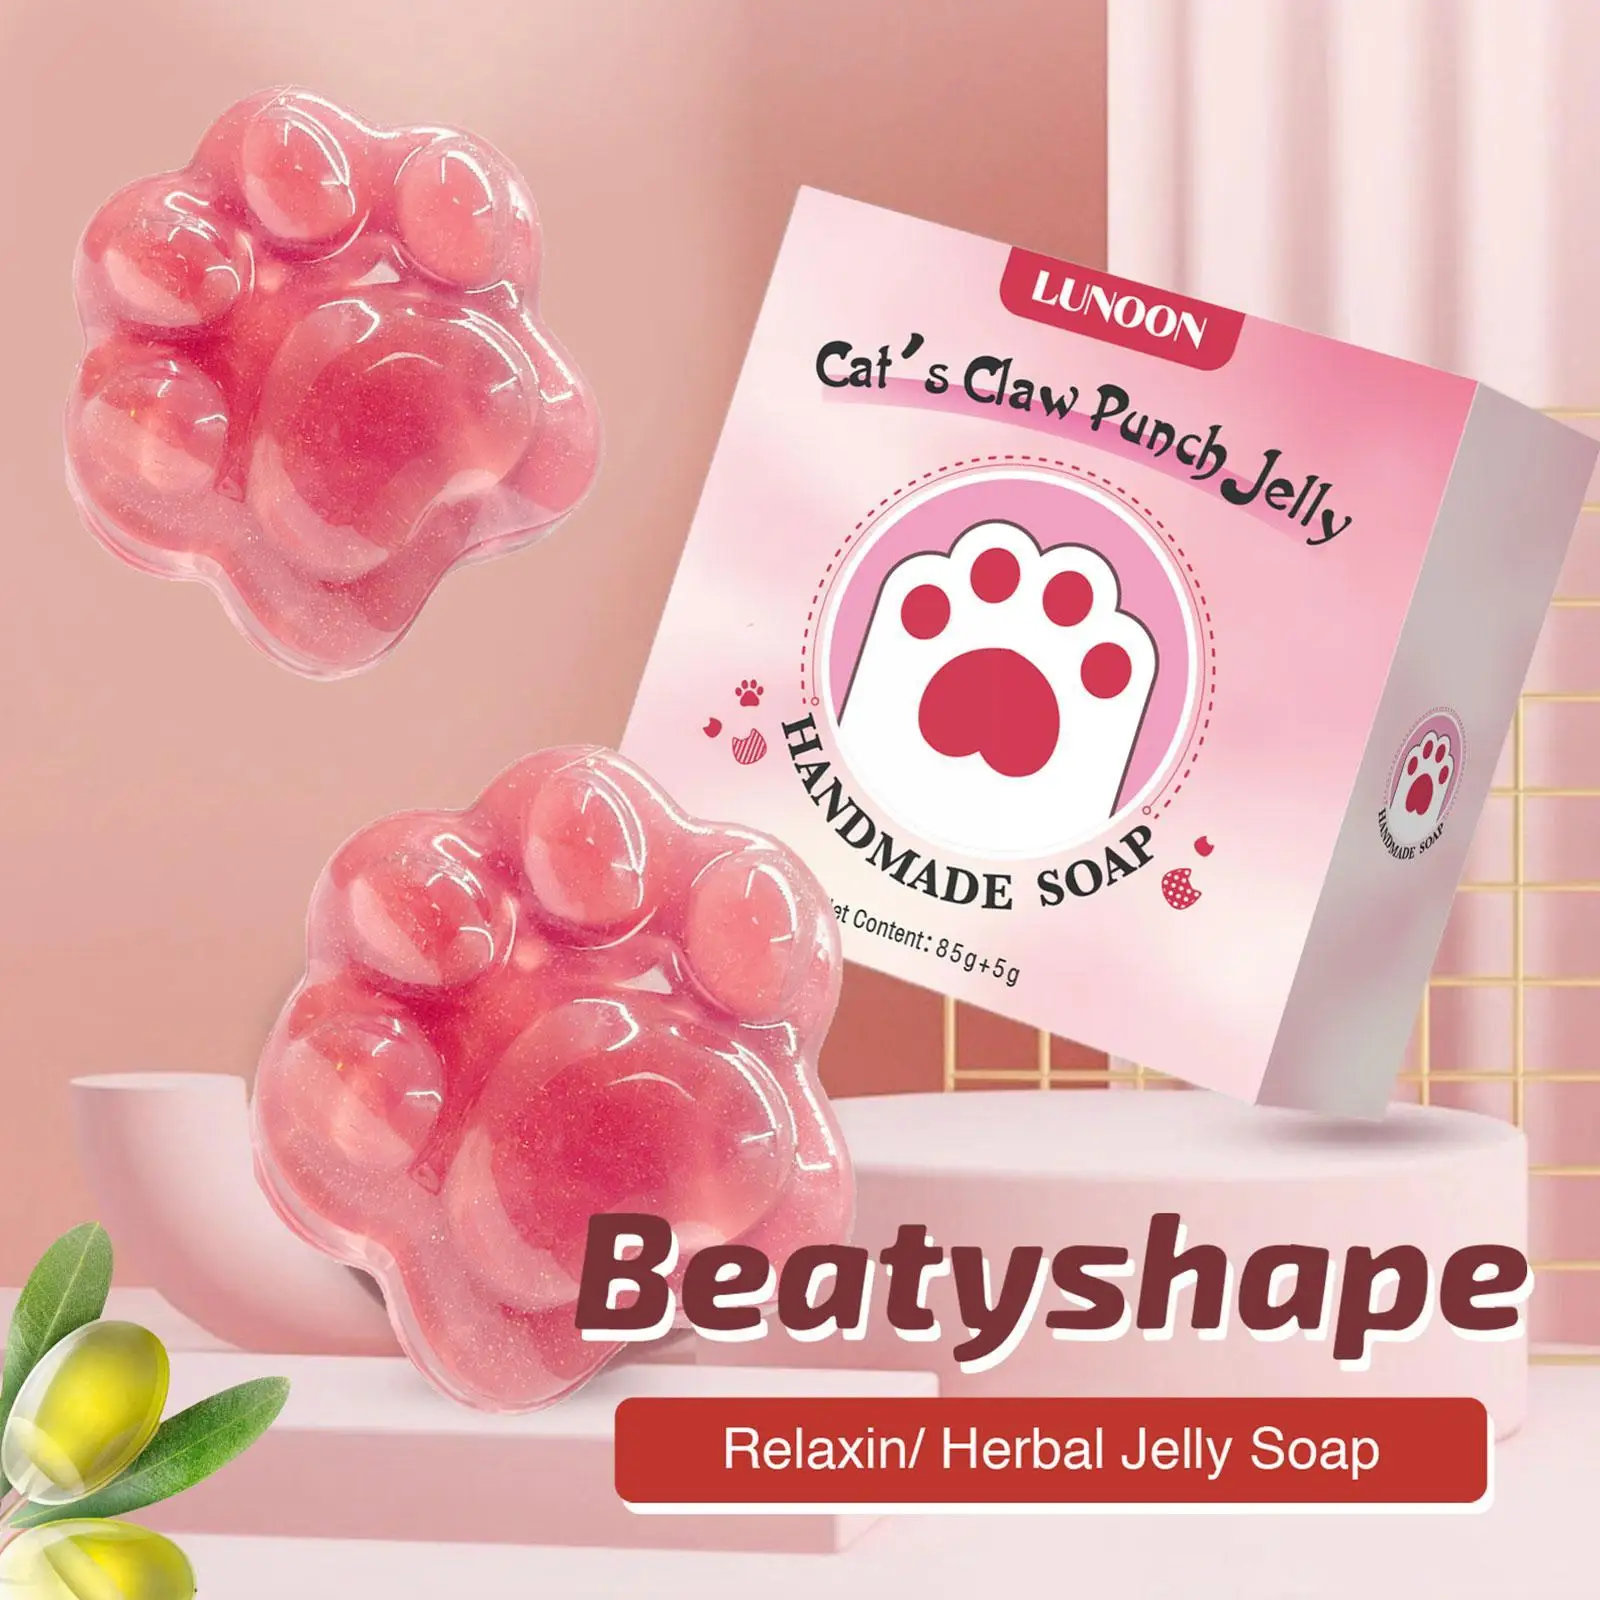 

85g Herbal Detoxing Anticellulite Jelly Soap Firming Moisturizing Shaping Skin Bath Body Soap Cleansing Soap Skin Cleaning F4n0